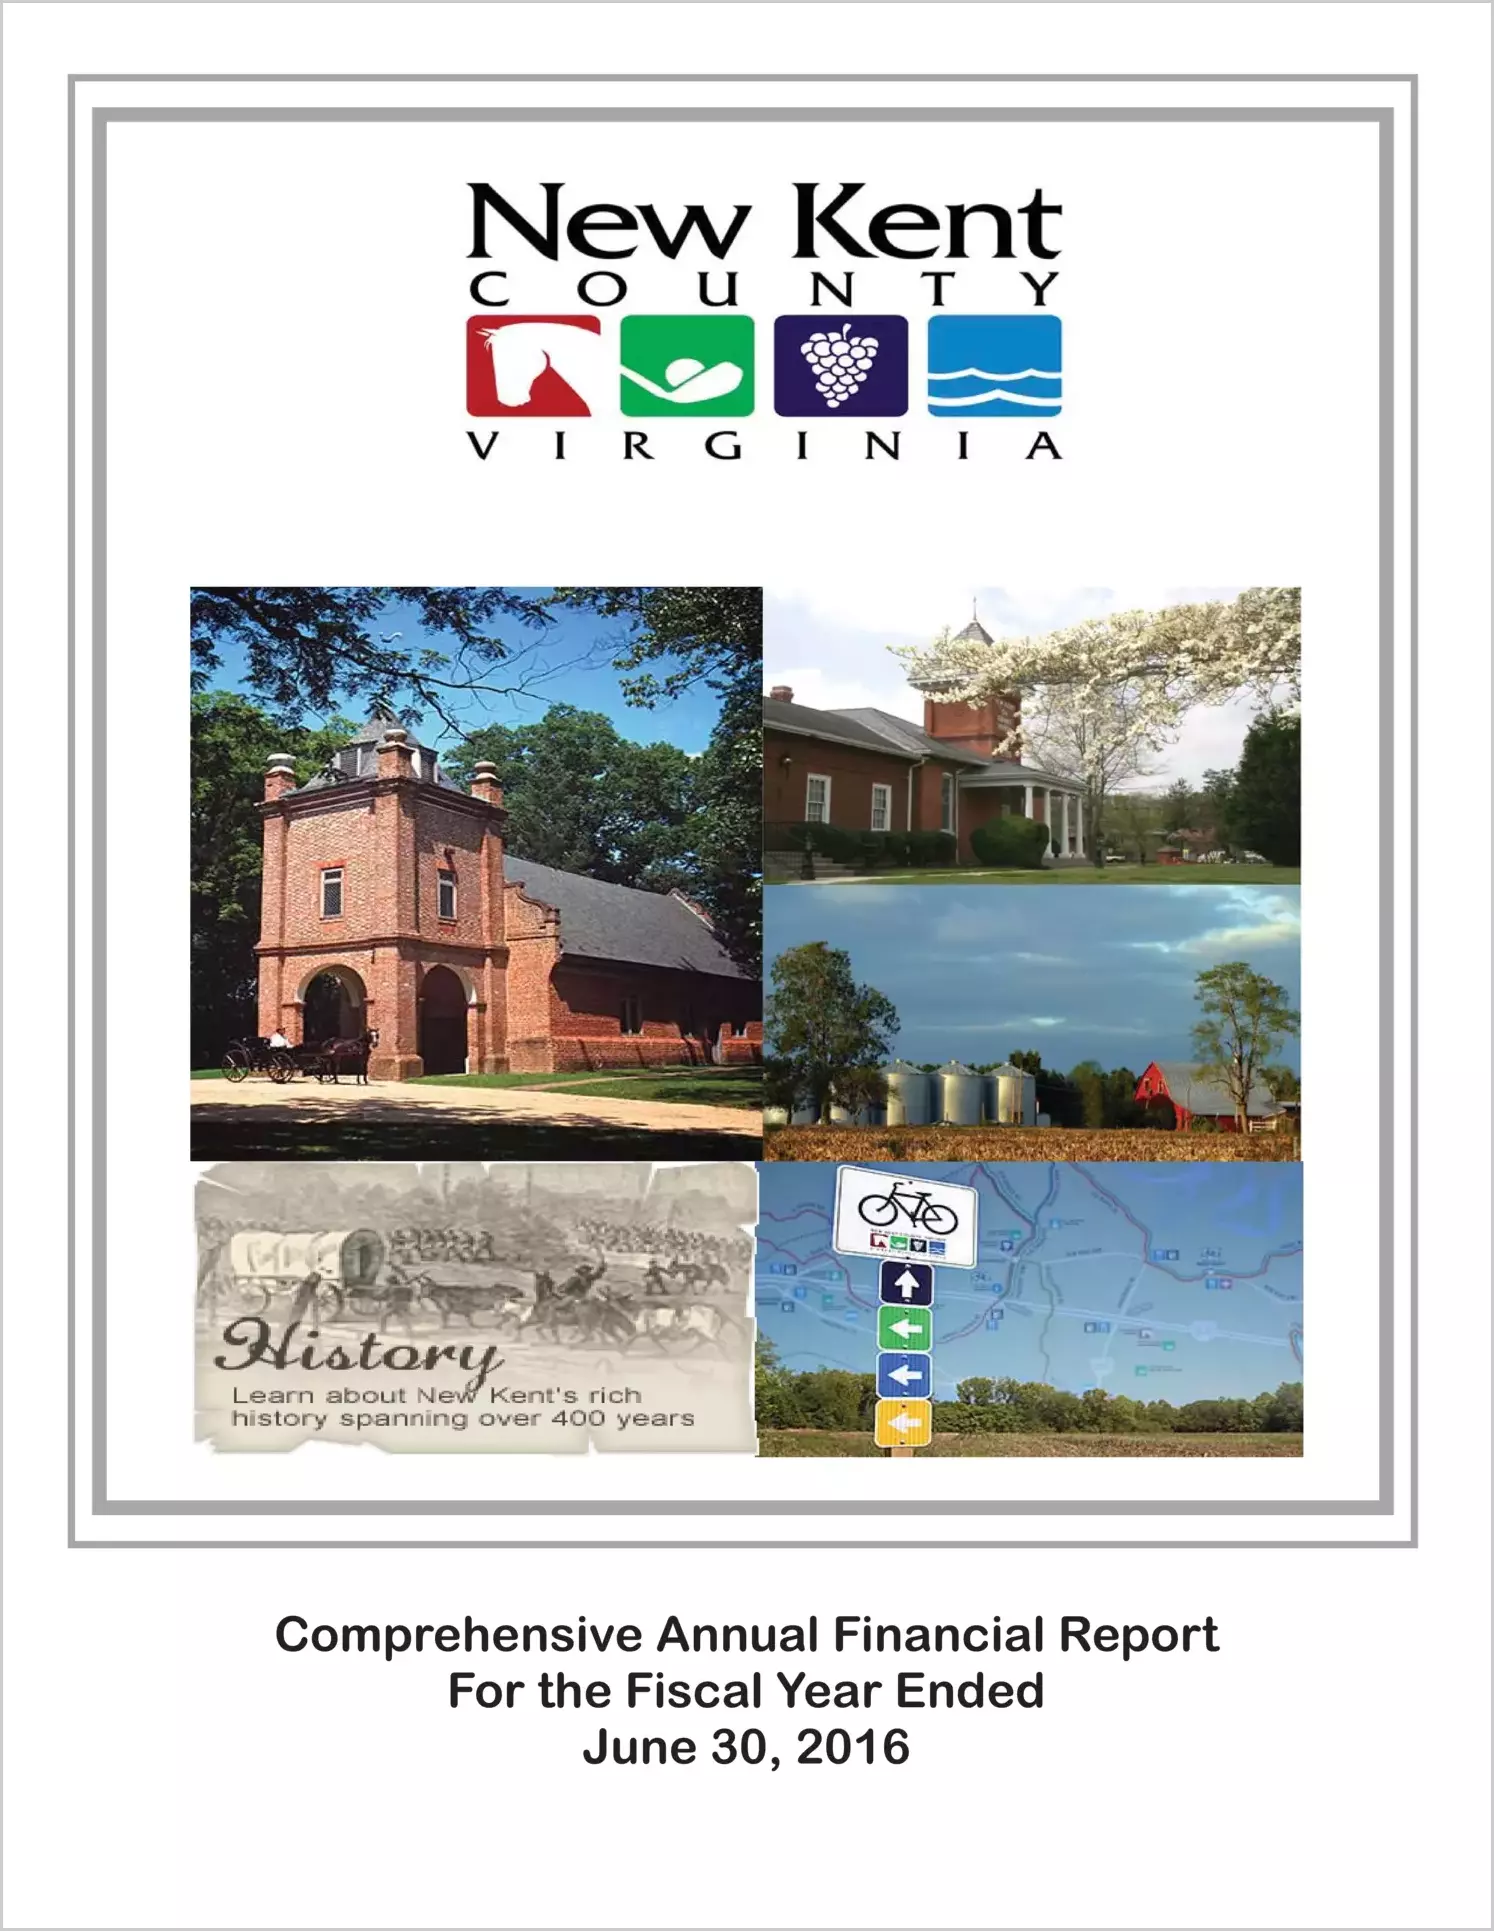 2016 Annual Financial Report for County of New Kent